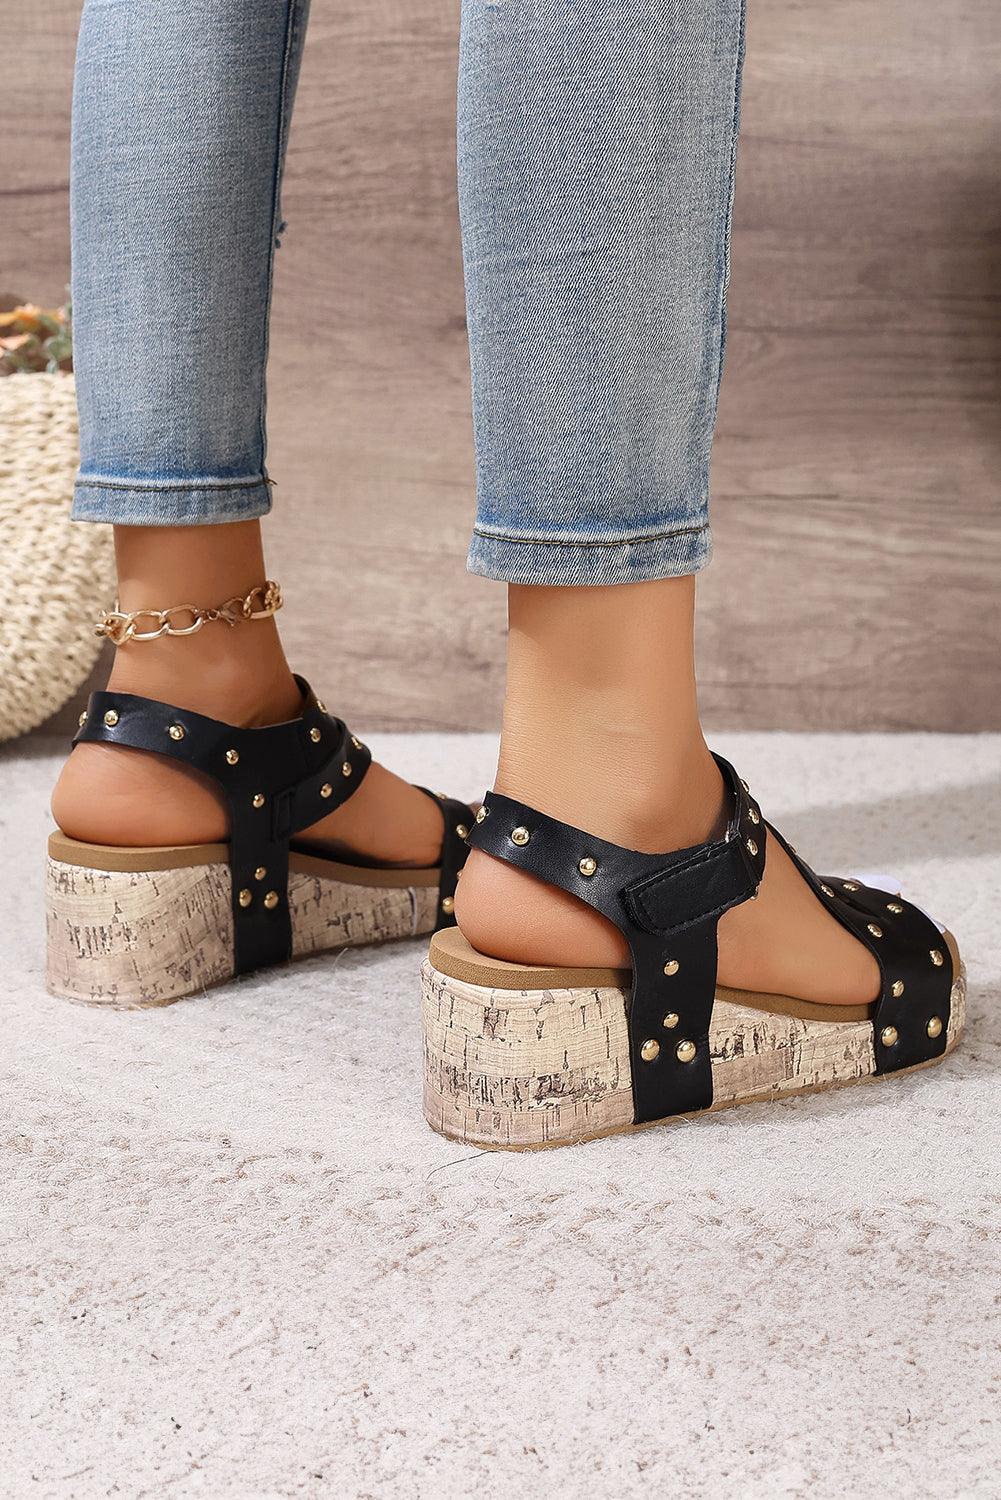 Black Rivet Hollow Out Leather Wedge Sandals - L & M Kee, LLC